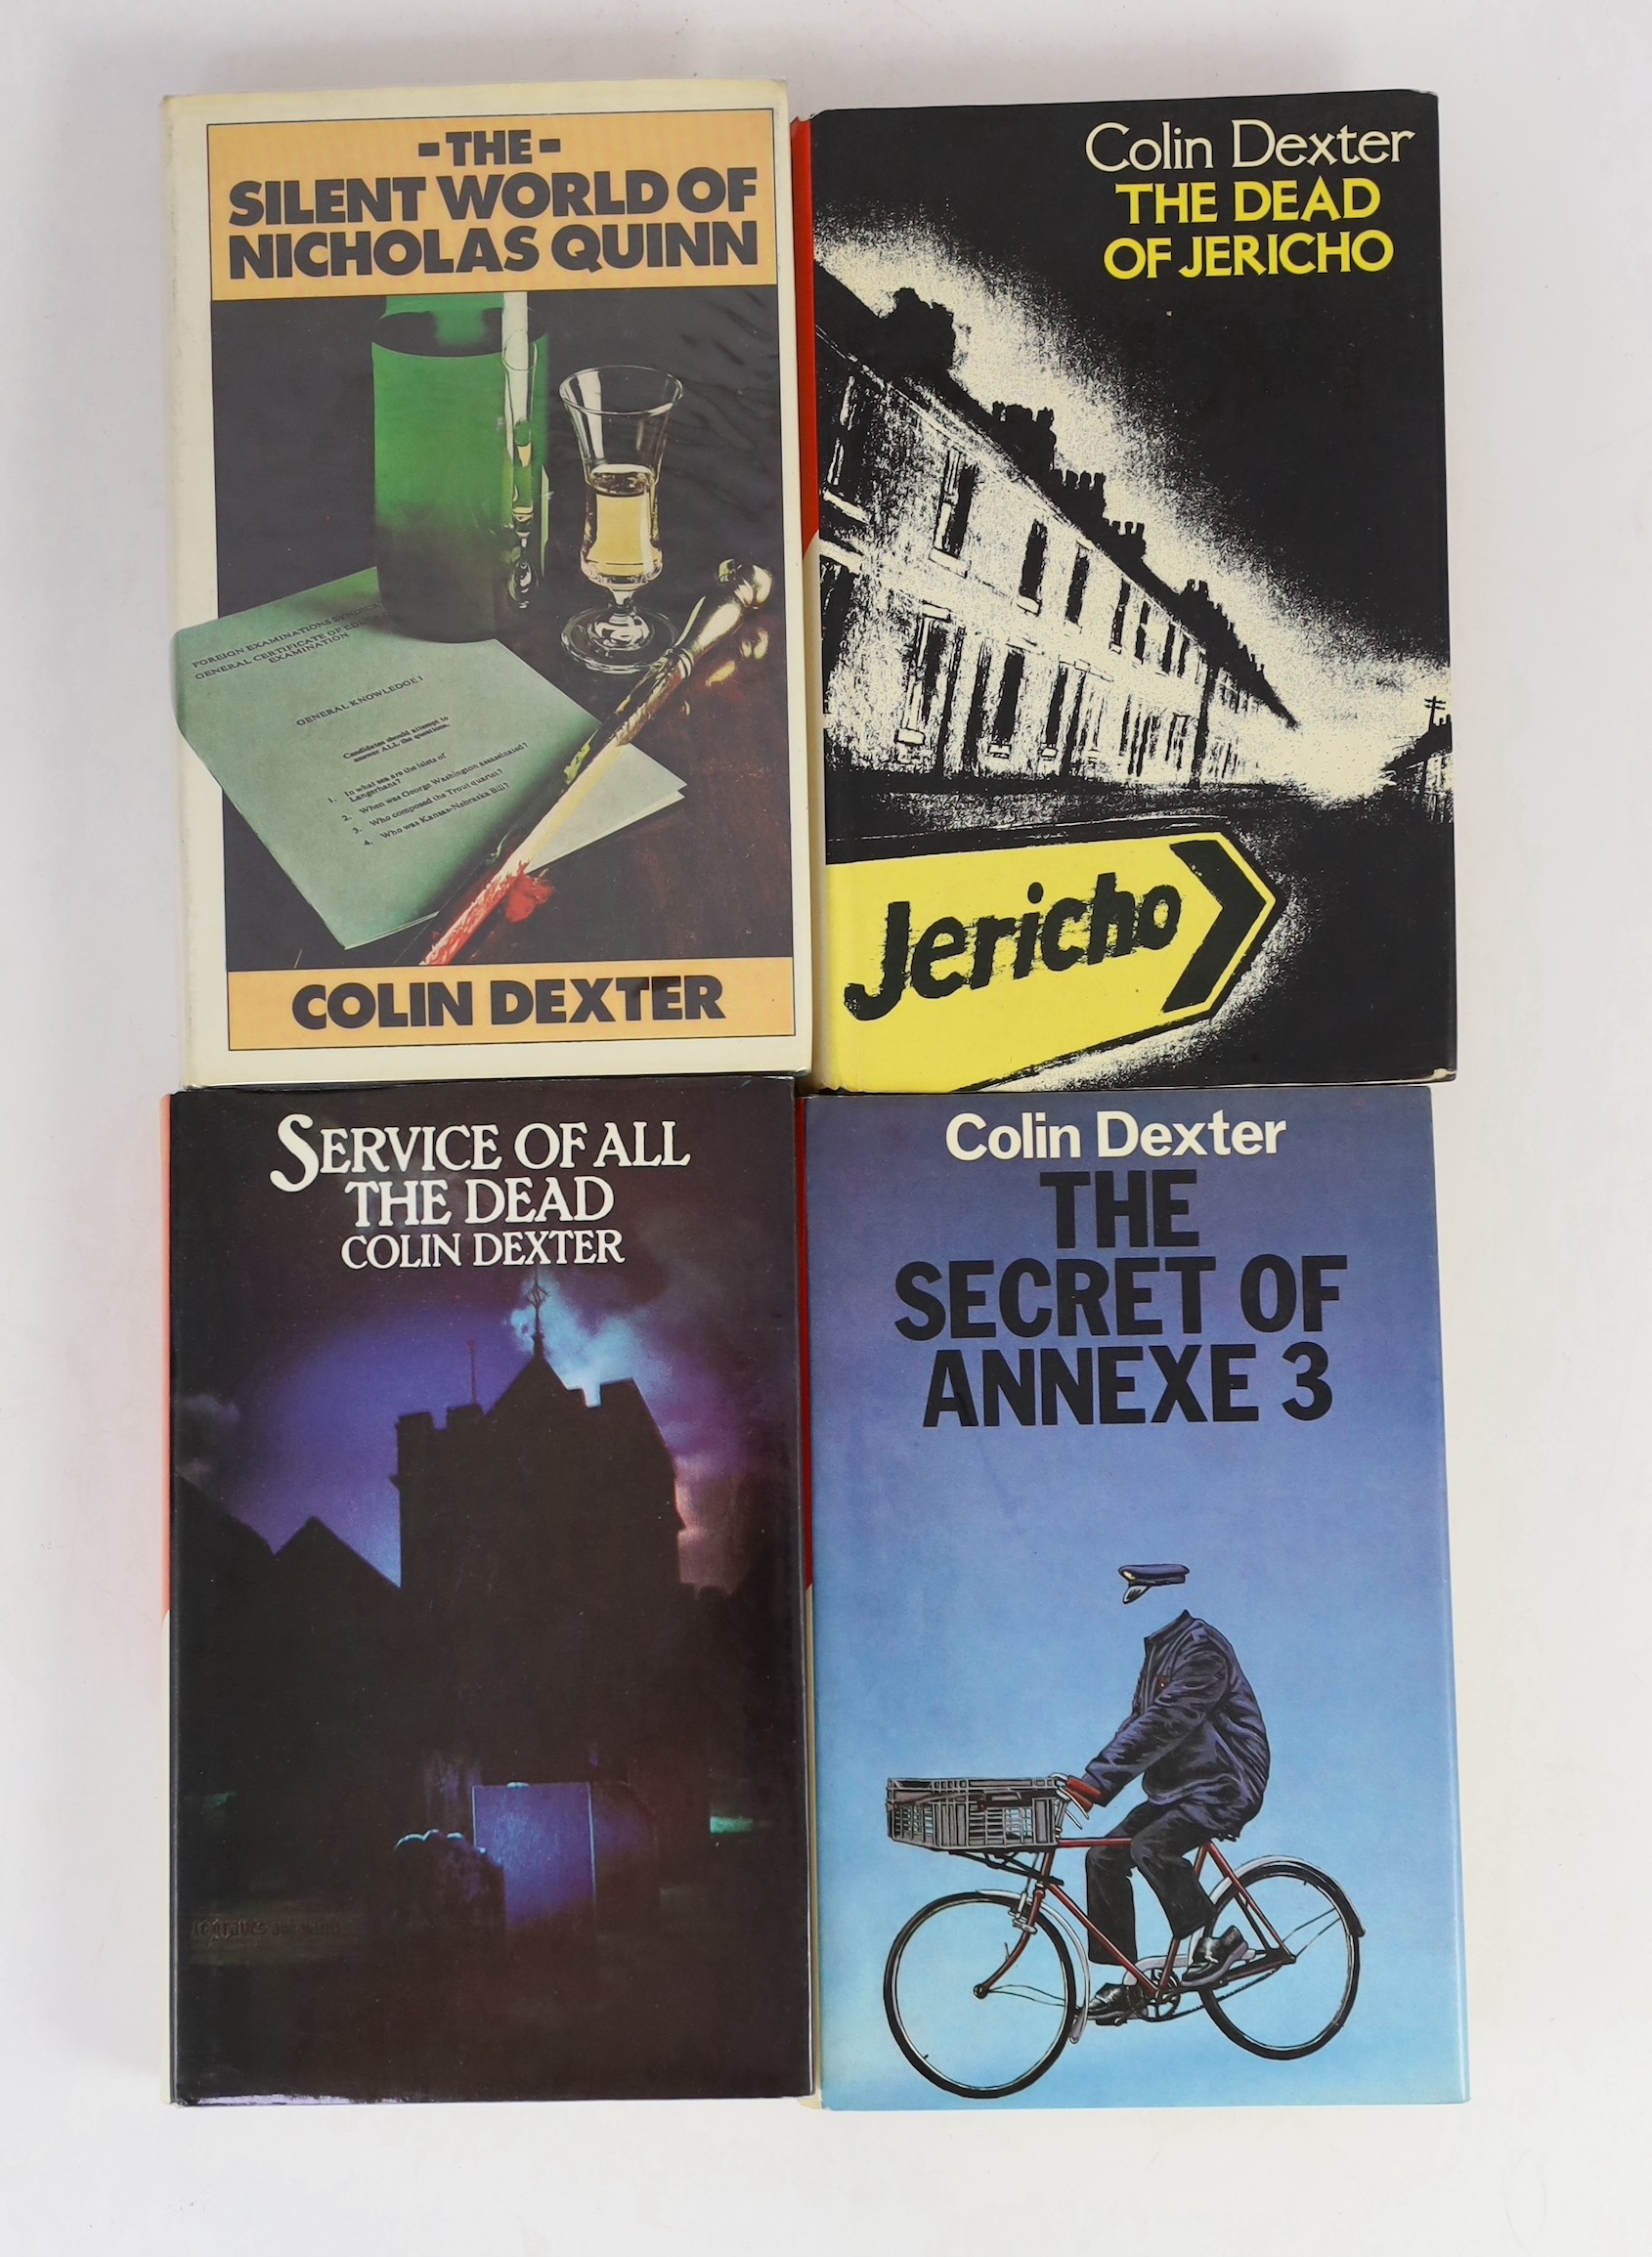 Dexter, Colin - 10 works, all 1st editions, in d/j’s, published by Macmillan, in London - The Silent World of Nicholas Quinn, 1977; Service of the Dead, 1979; The Dead of Jericho, (ex library, with stamps), 1981; The Sec